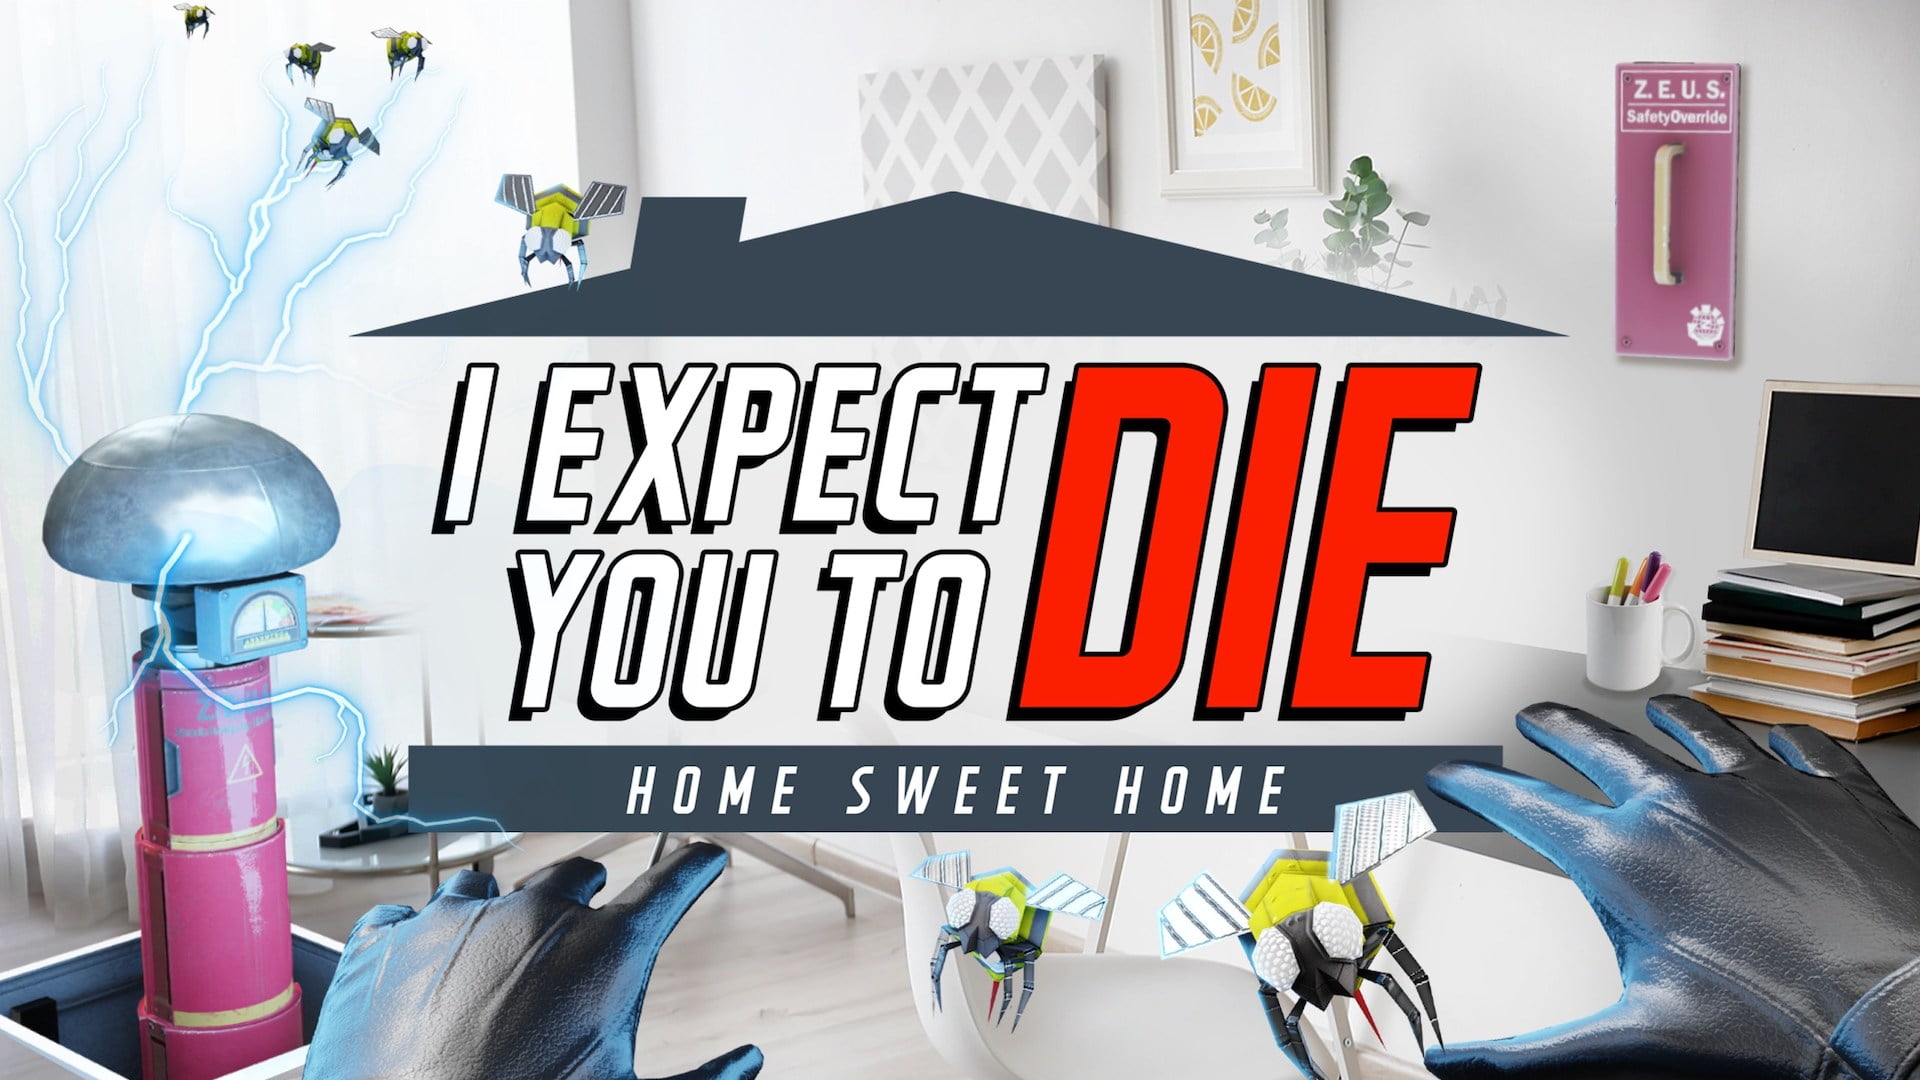 "I Expect You to Die: Home Sweet Home" shows the pros and cons of mixed reality